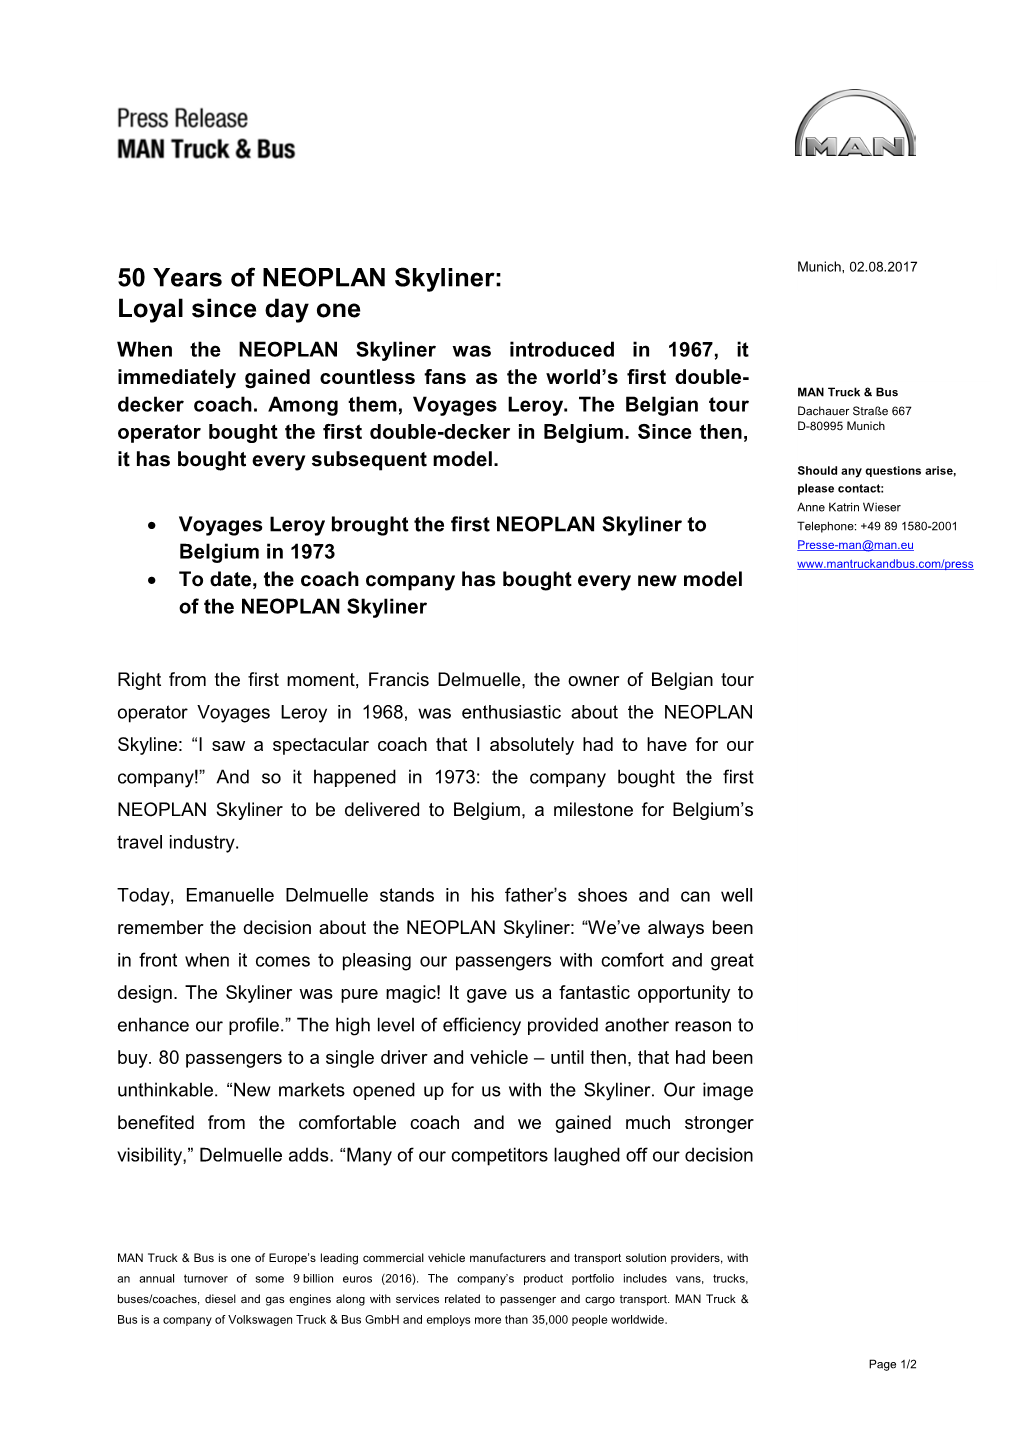 50 Years of NEOPLAN Skyliner: Loyal Since Day